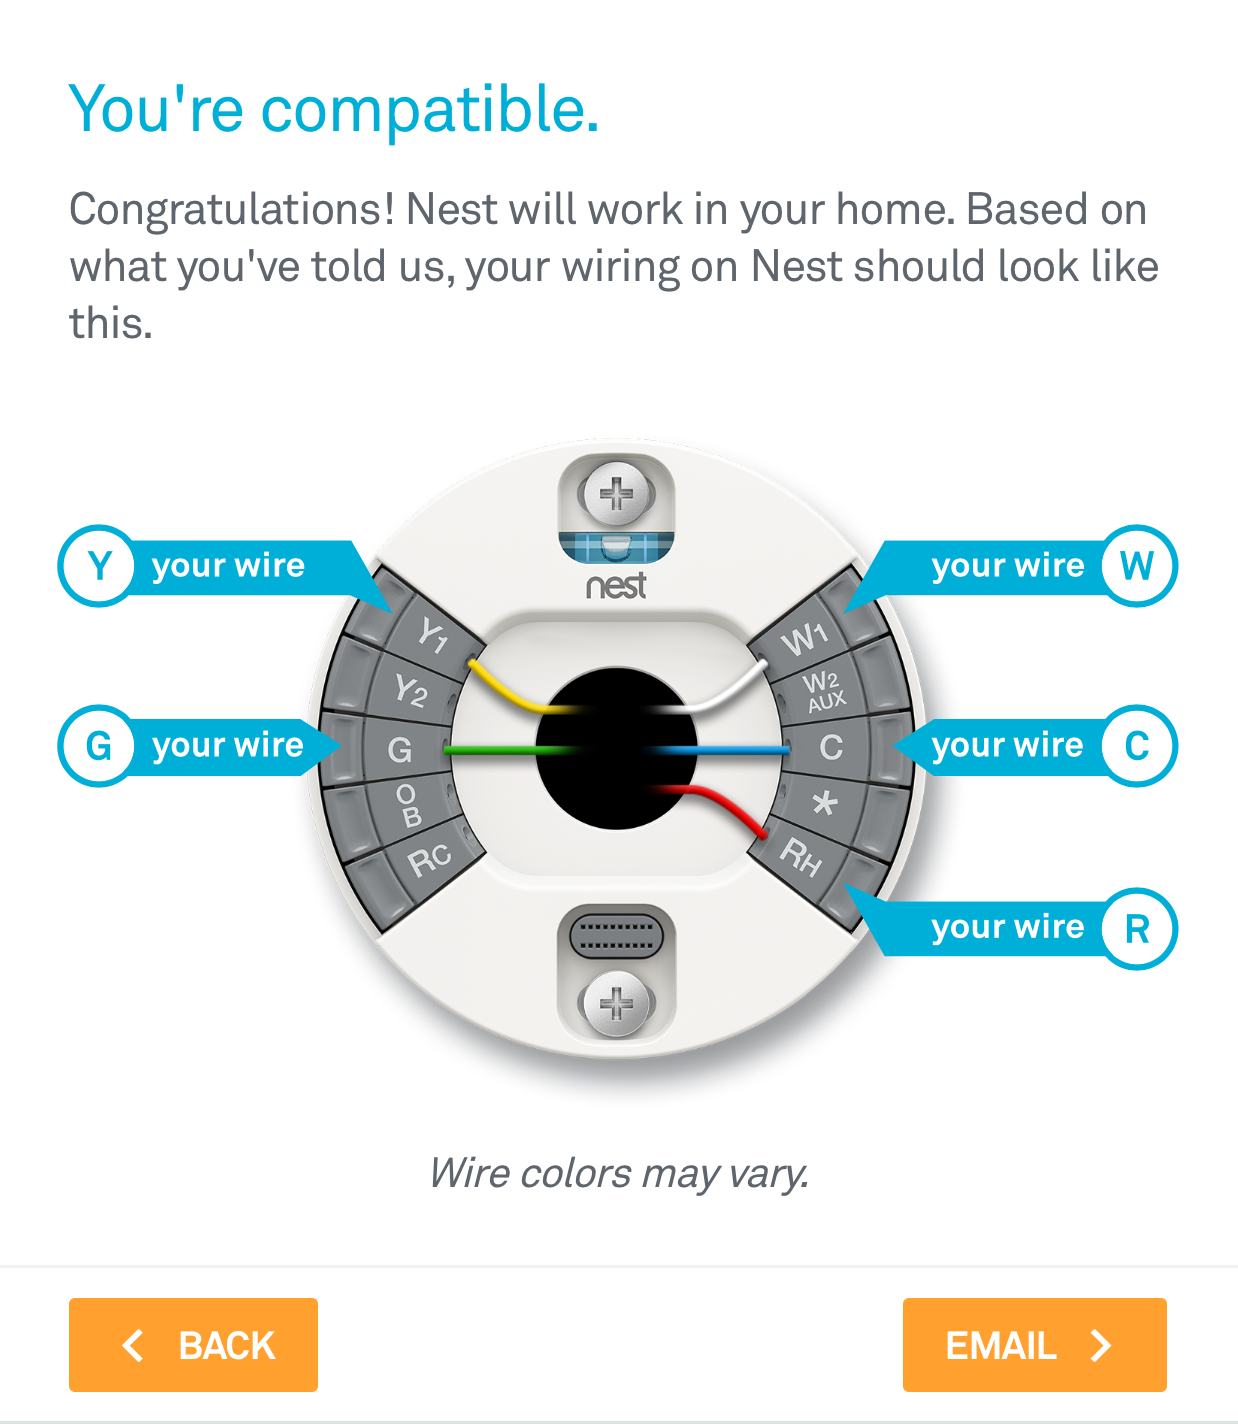 Nest Wiring Diagram How To Install The Nest Thermostat The Craftsman Blog